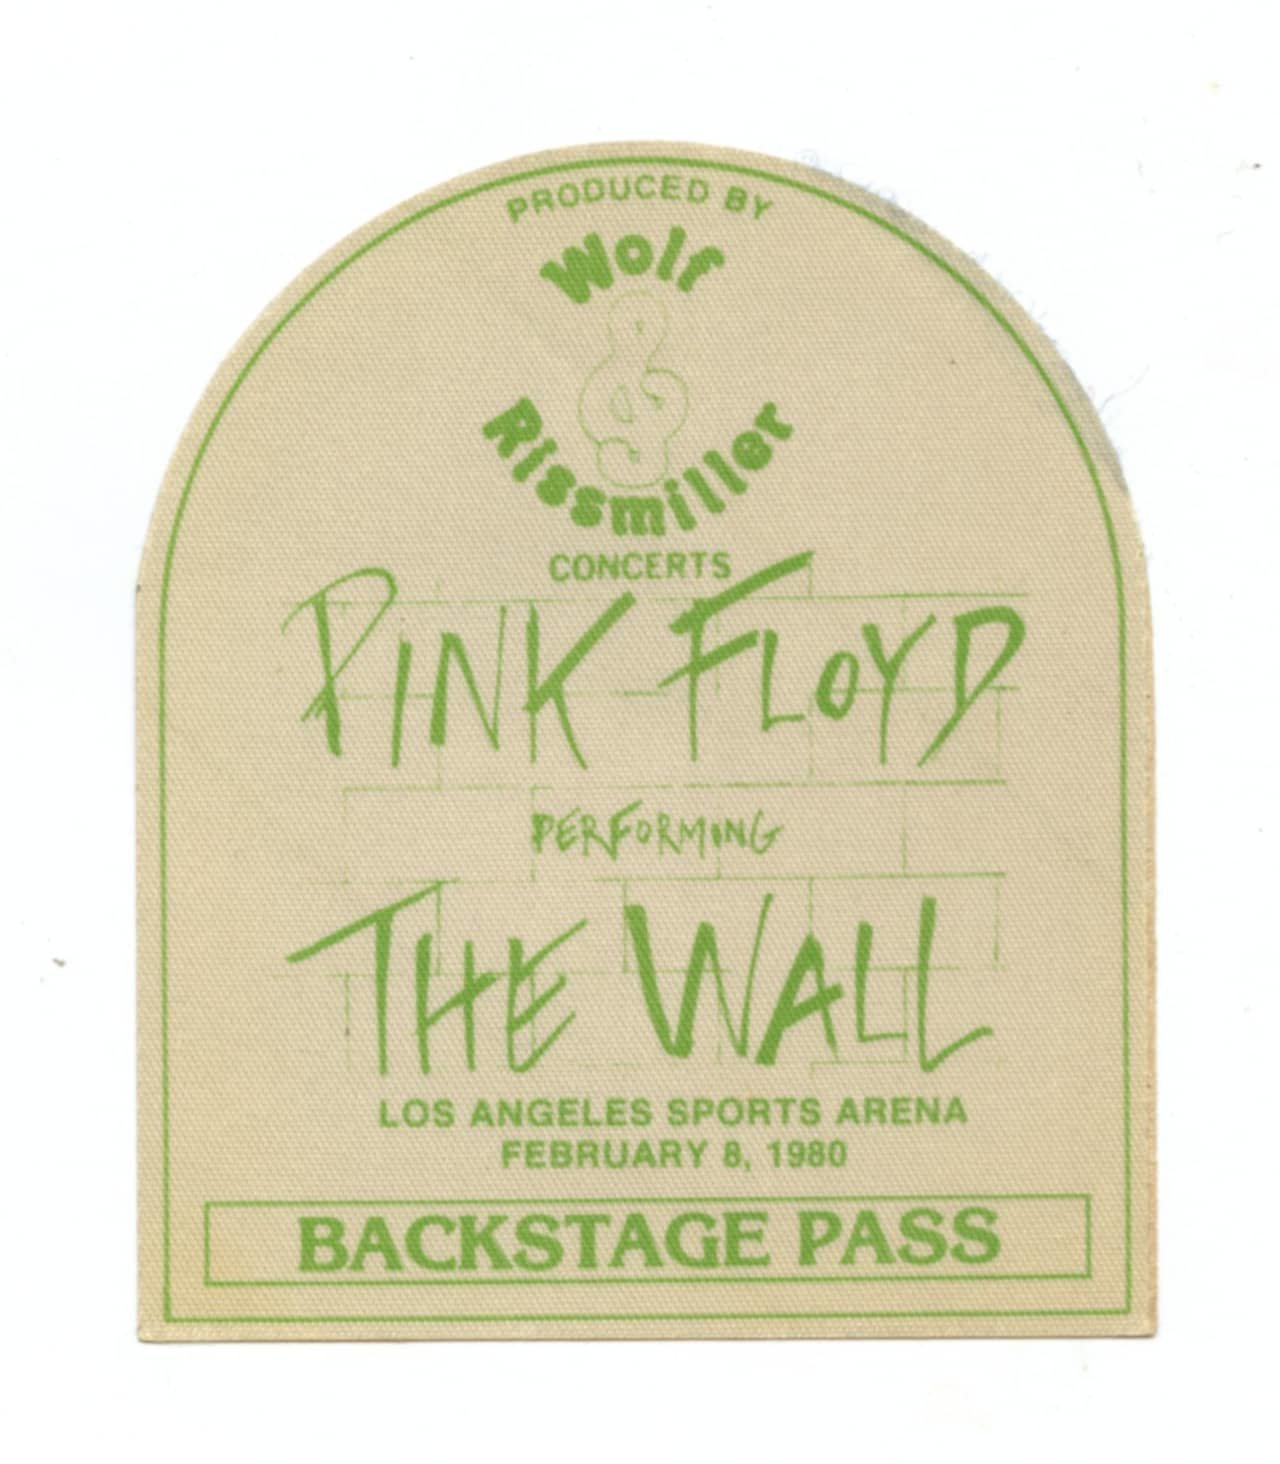 Pink Floyd Backstage Pass 1980 Feb 8 Los Angeles Sports Arena The Wall Tour